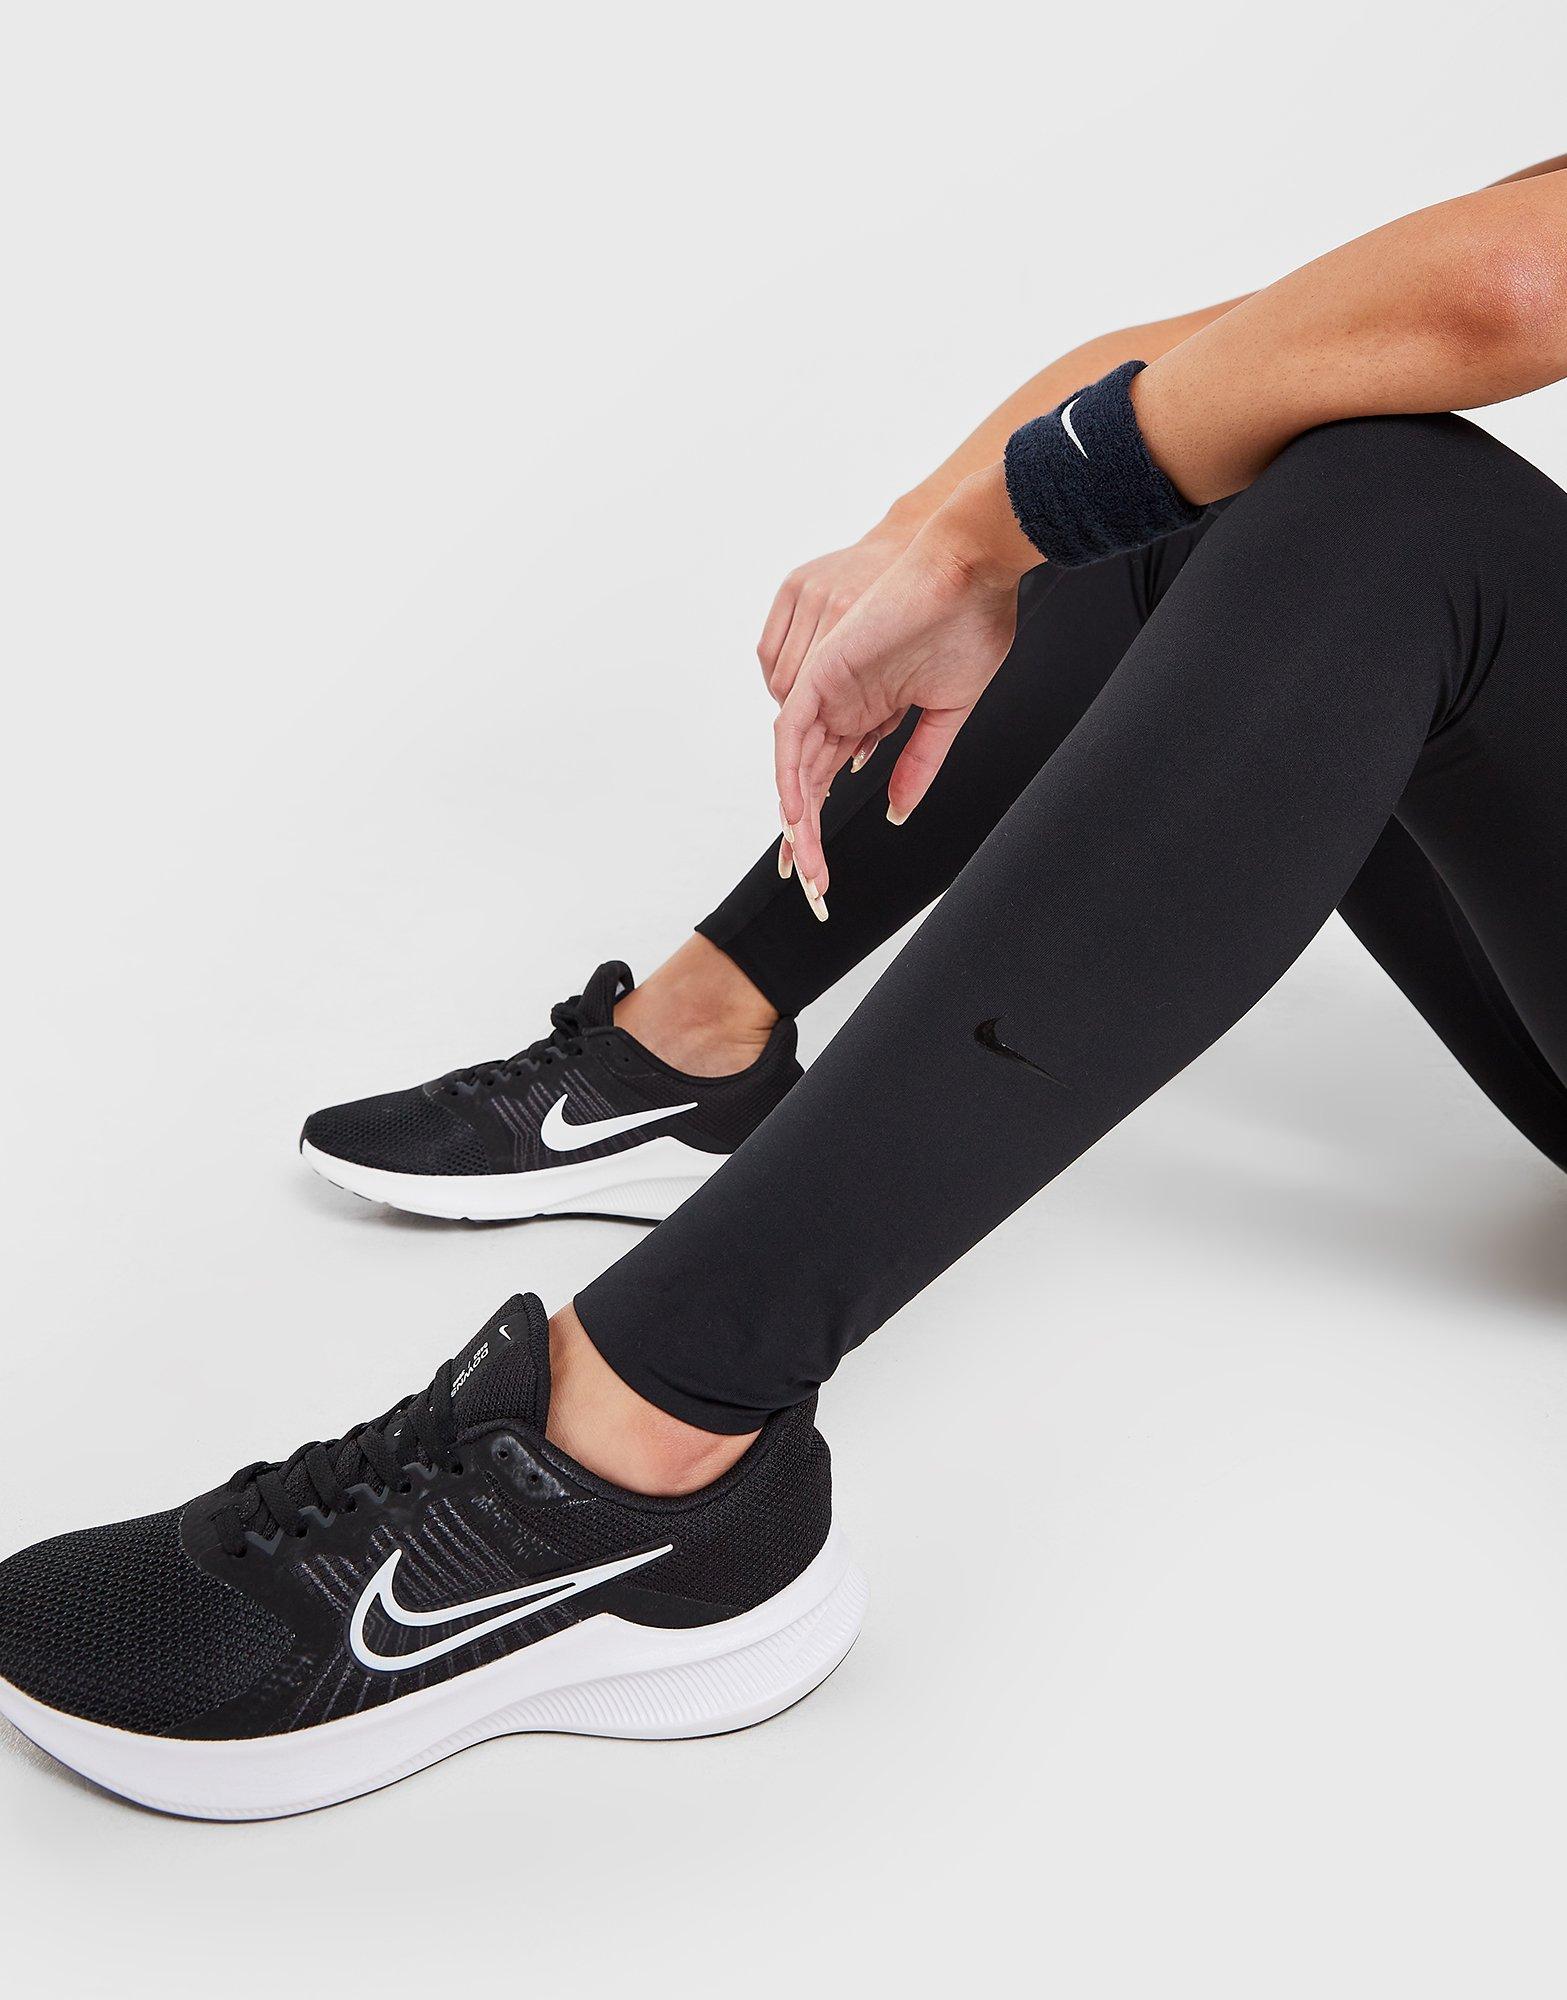 nike luxe tights